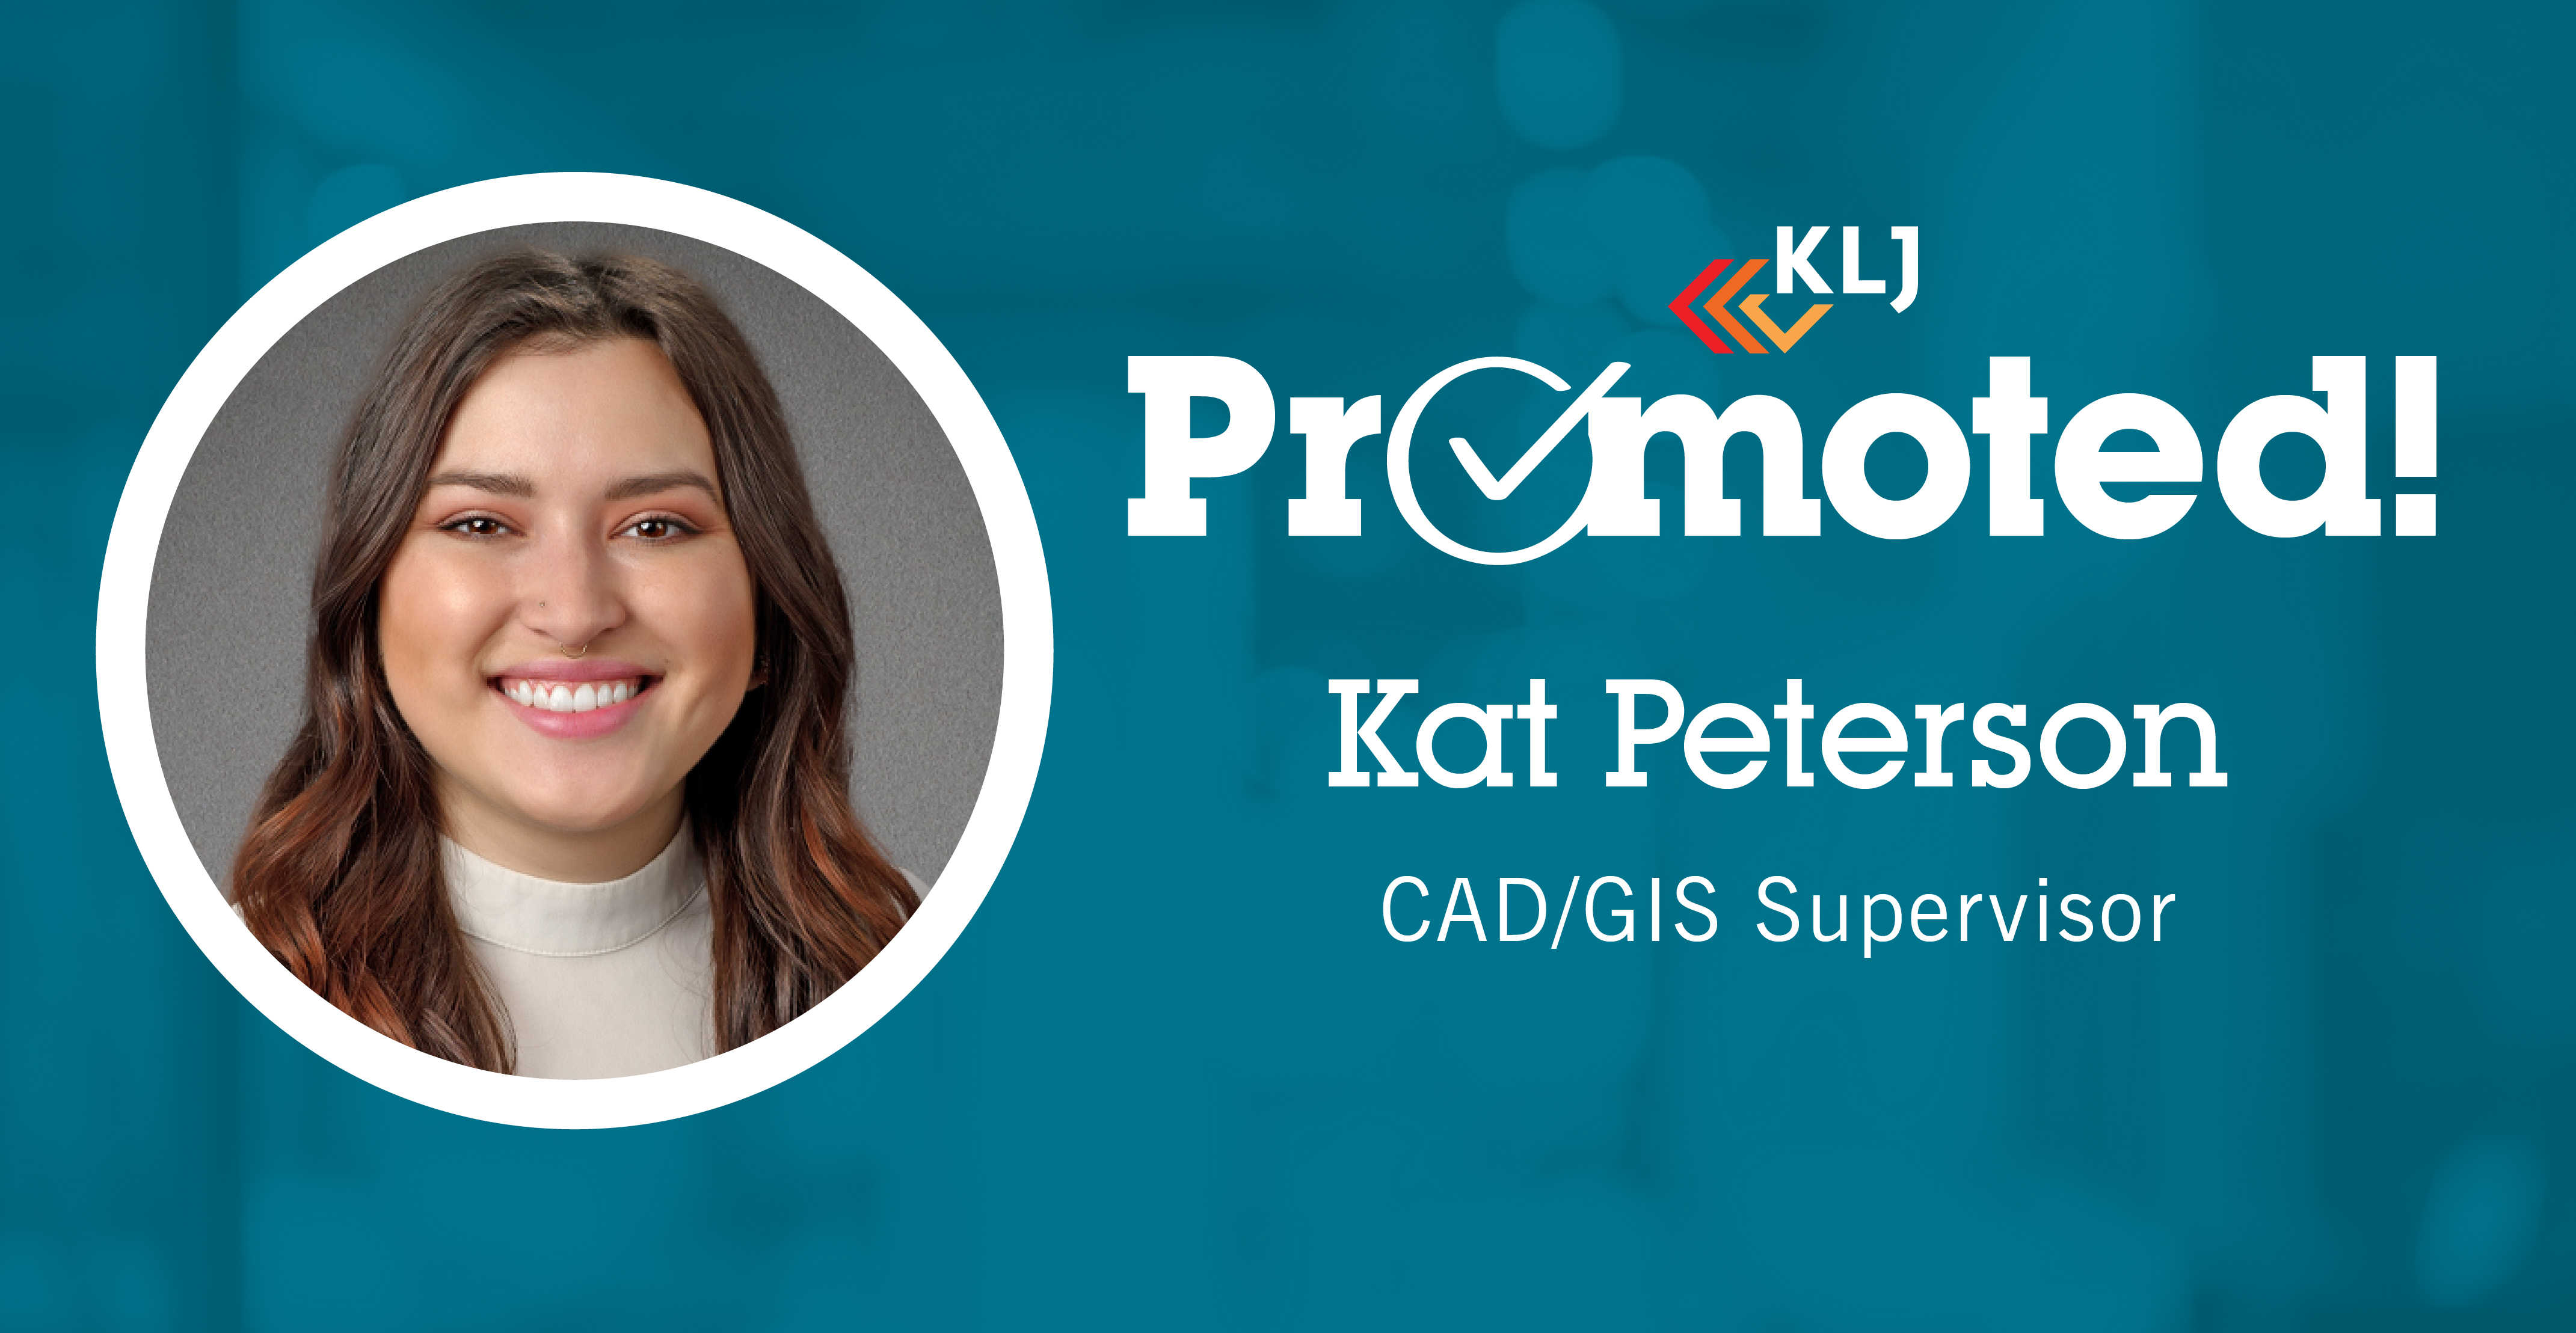 Peterson Promoted CAD/GIS Supervisor